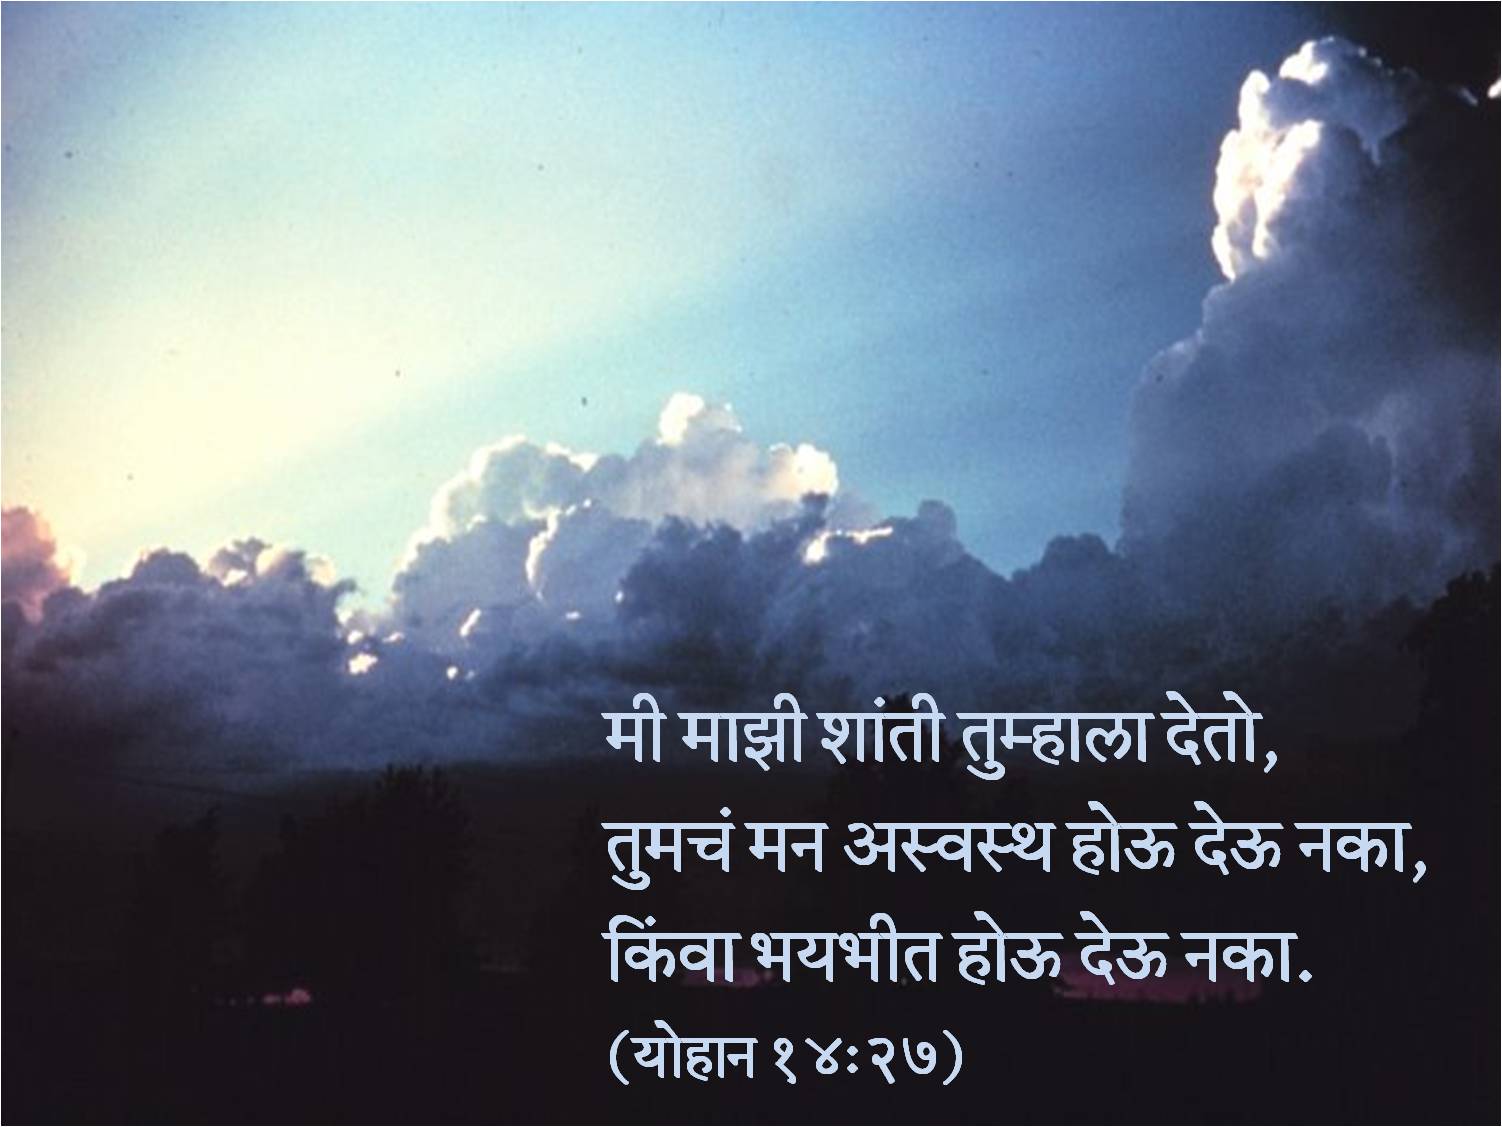 Marathi Bible Wallpapers (16). Posted by Prof R R Kelkar on May 23, 2009